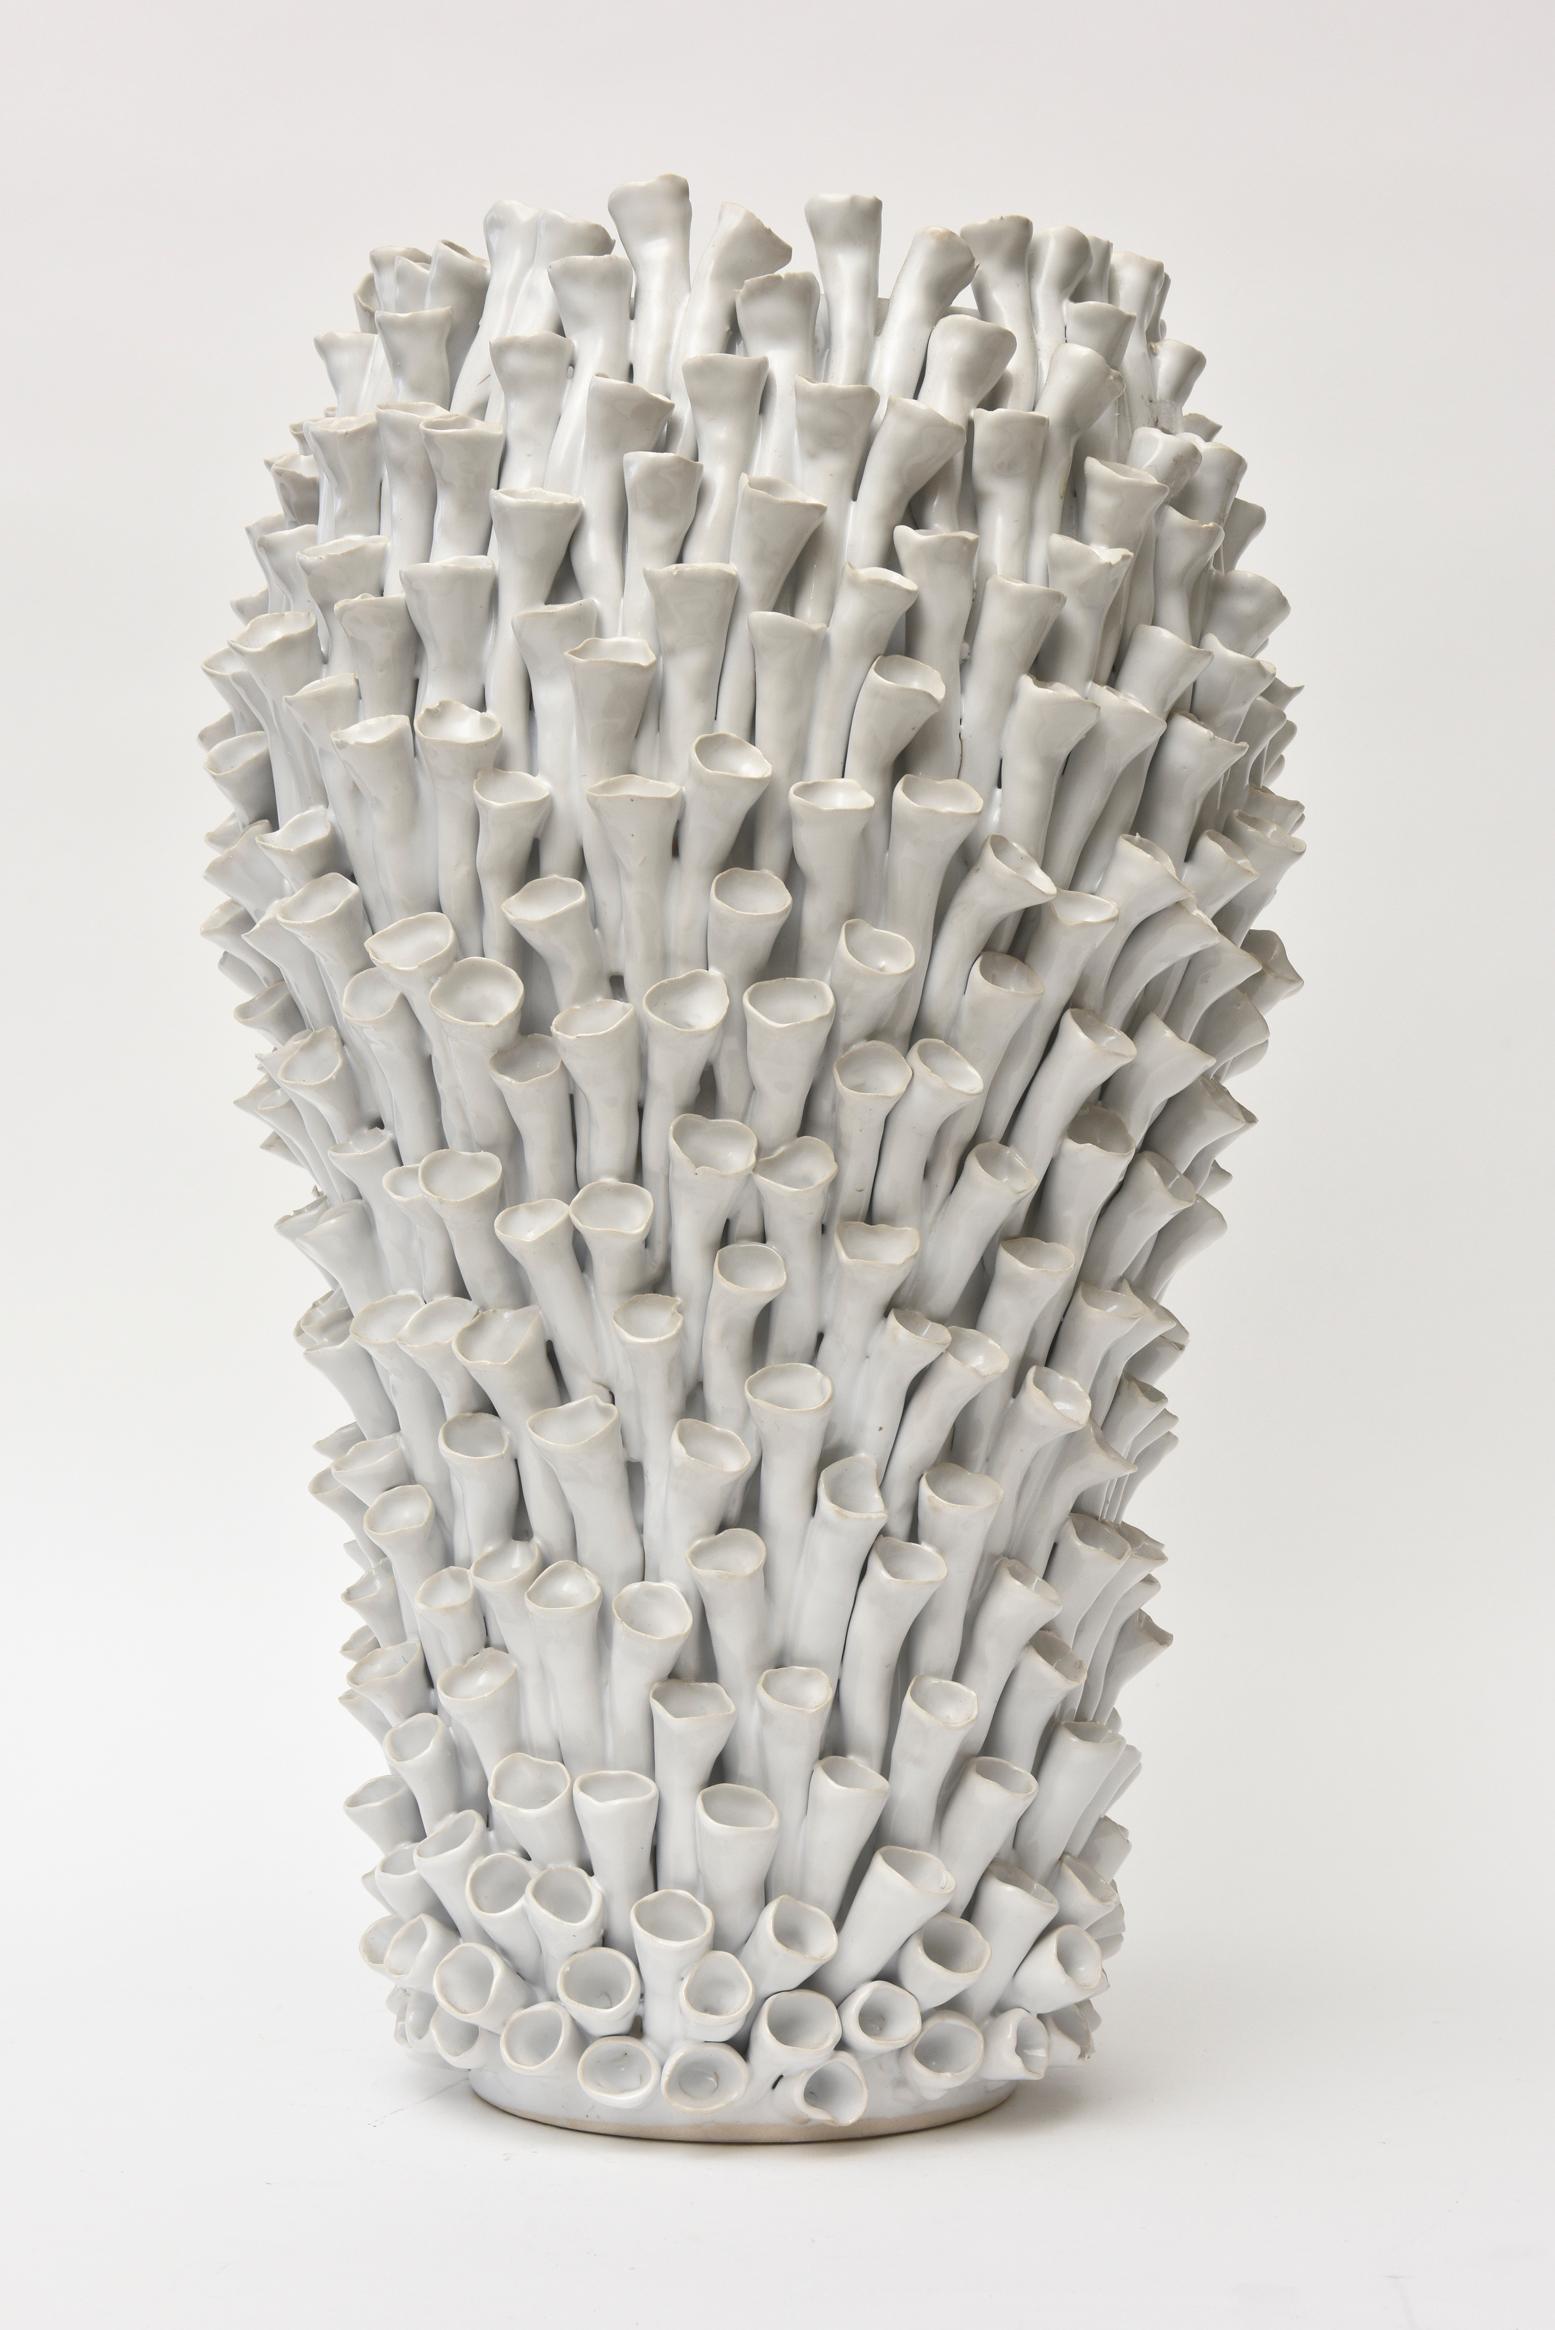 This amazing detailed organic modern white ceramic sculptural object/ vase/ vessel has hundreds of protruding coiled petals surround. There are no markings on it and would presume this is from the 1990s. There is an enormous amount of work involved